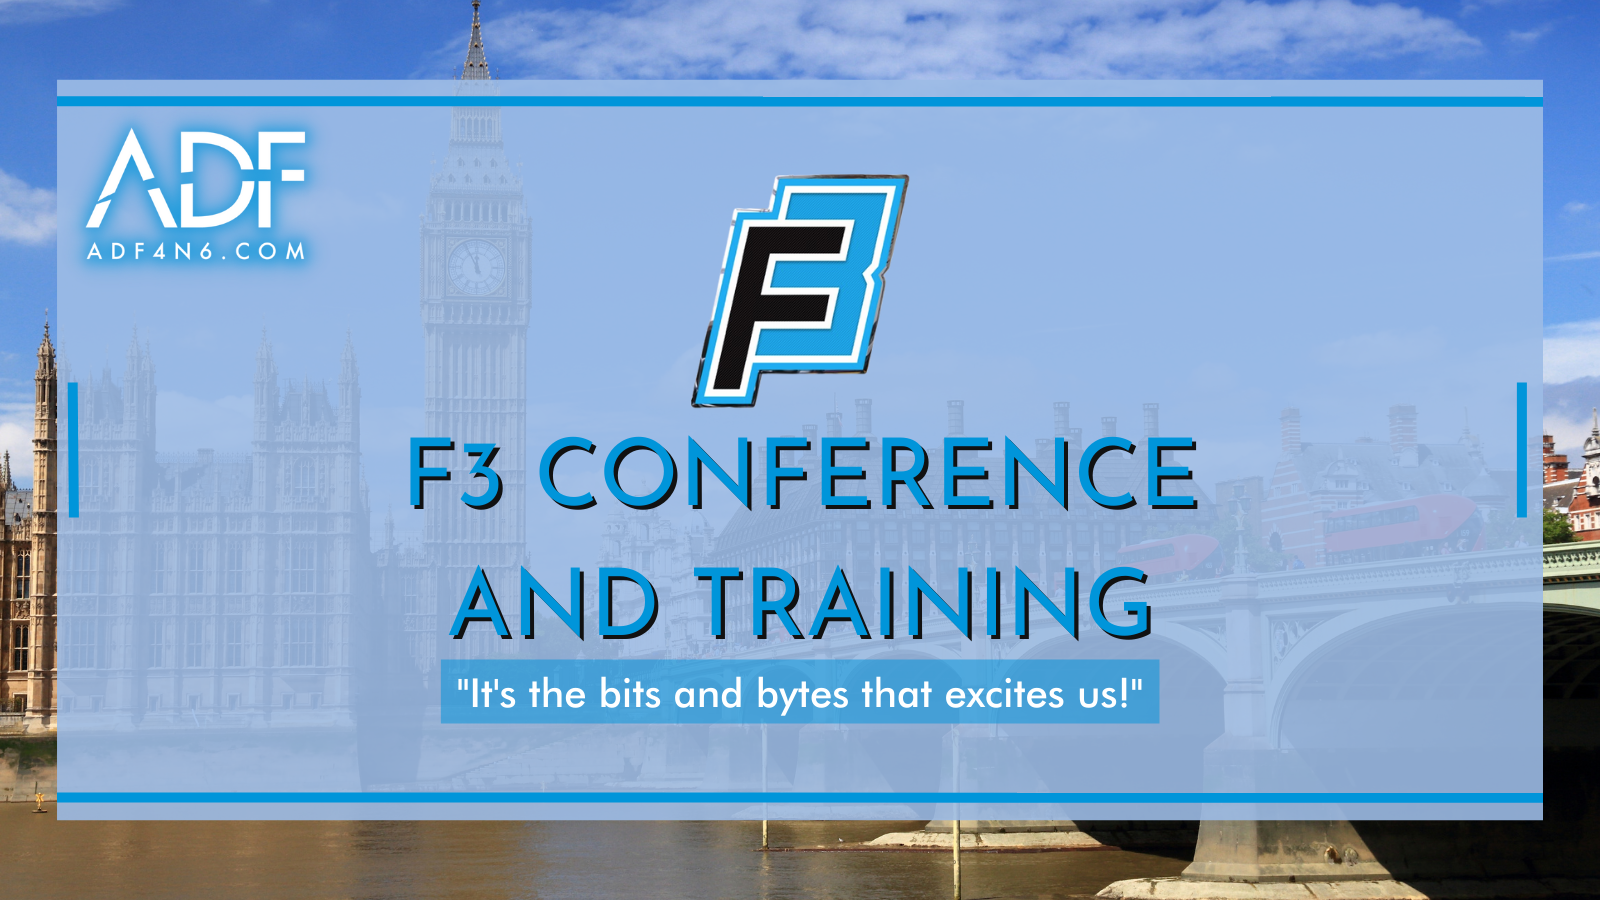 ADF Exhibits at the F3 Conference and Training in the UK